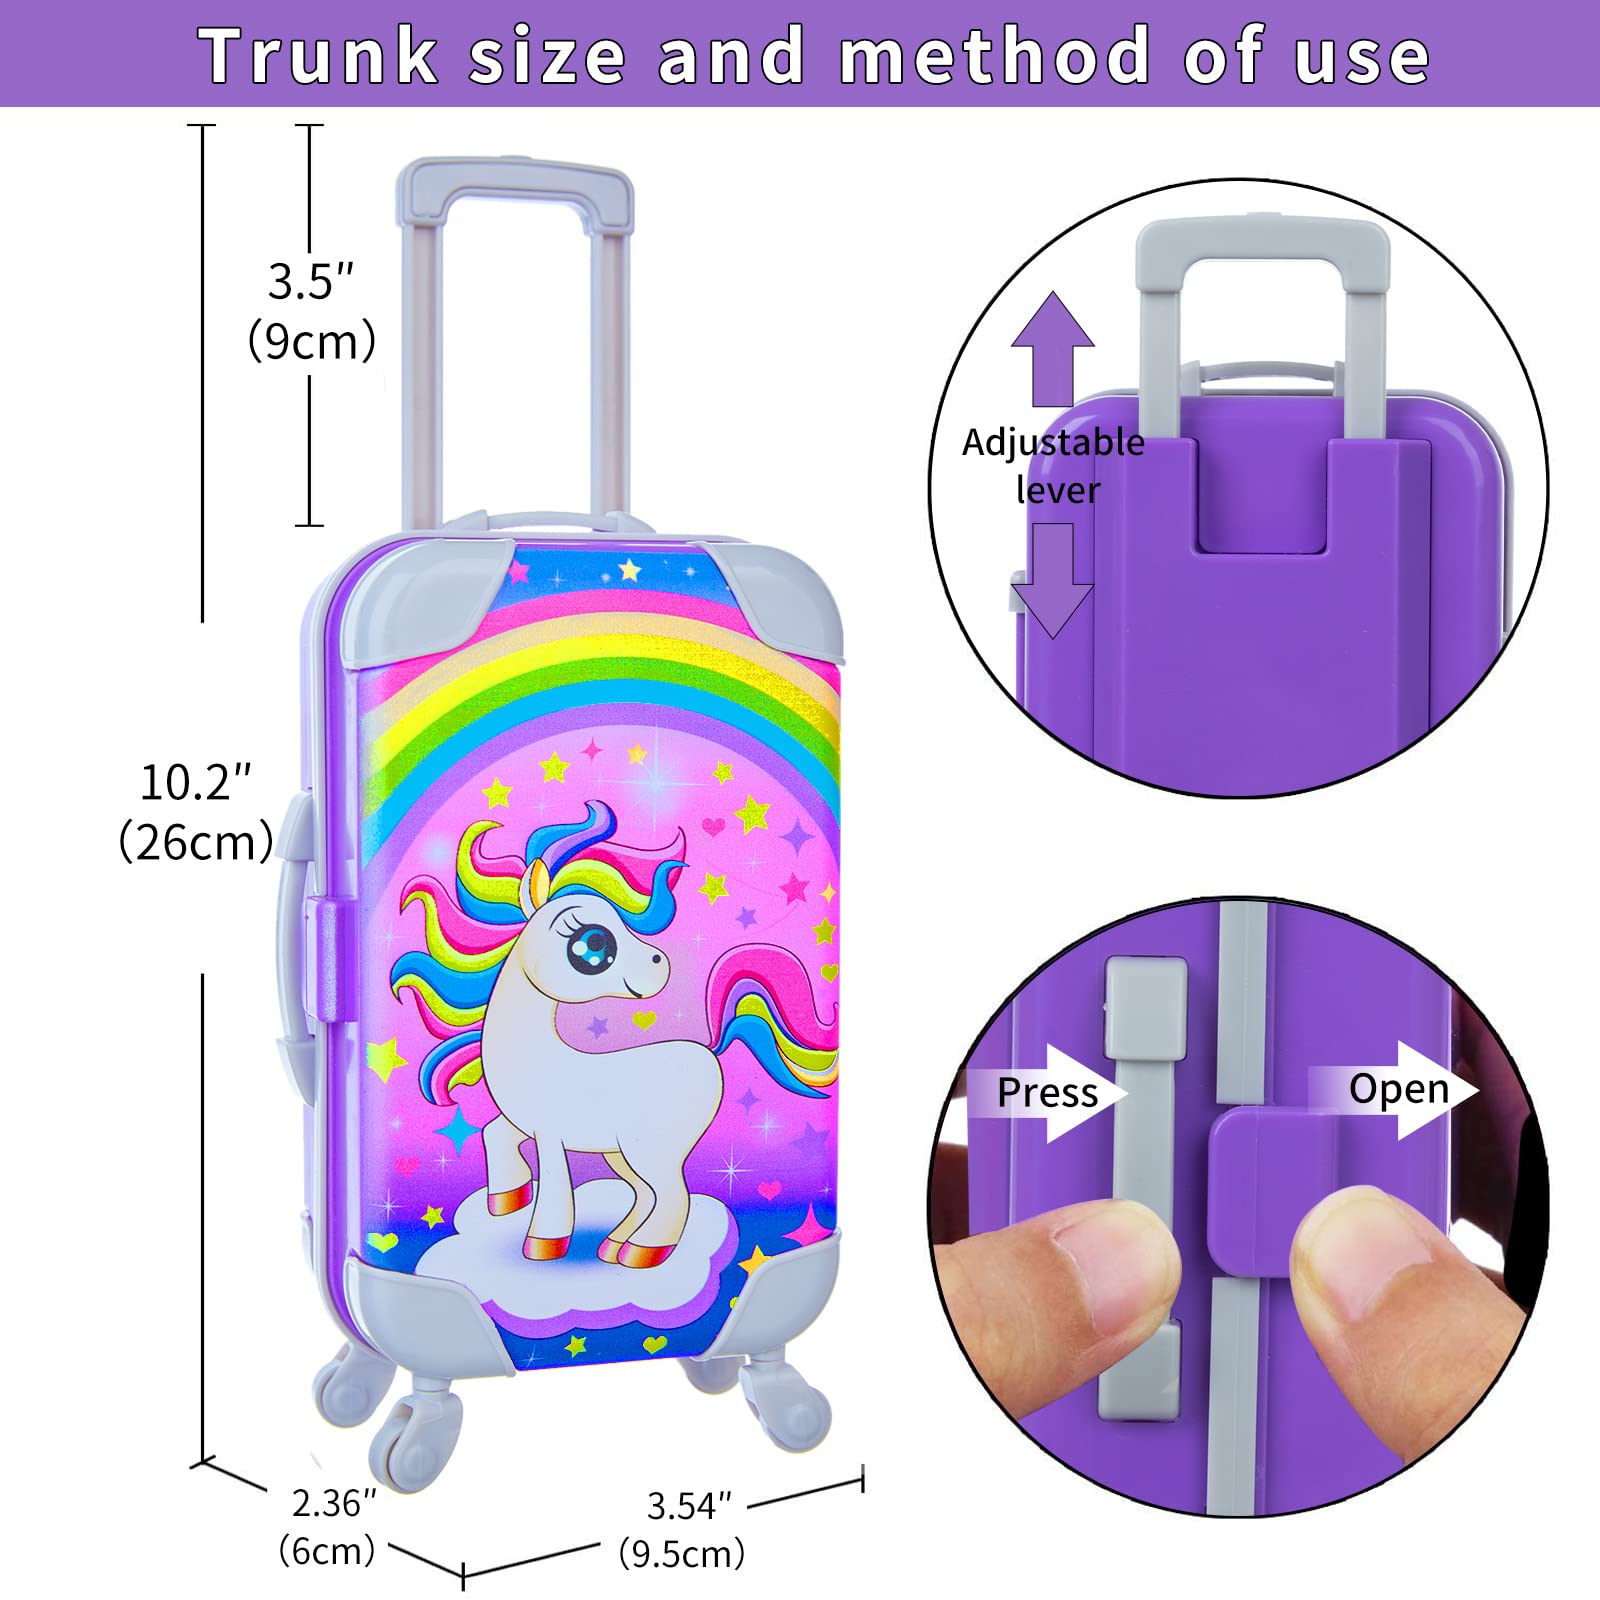 DONTNO 29 Pcs American Doll Clothes and Accessories, Cute Travel Play Set fit 18 Inch Doll with Purple Clothes Suit, Unicorn Suitcase, Handbag, Lipstick, Camera, Sunglasses for Kids